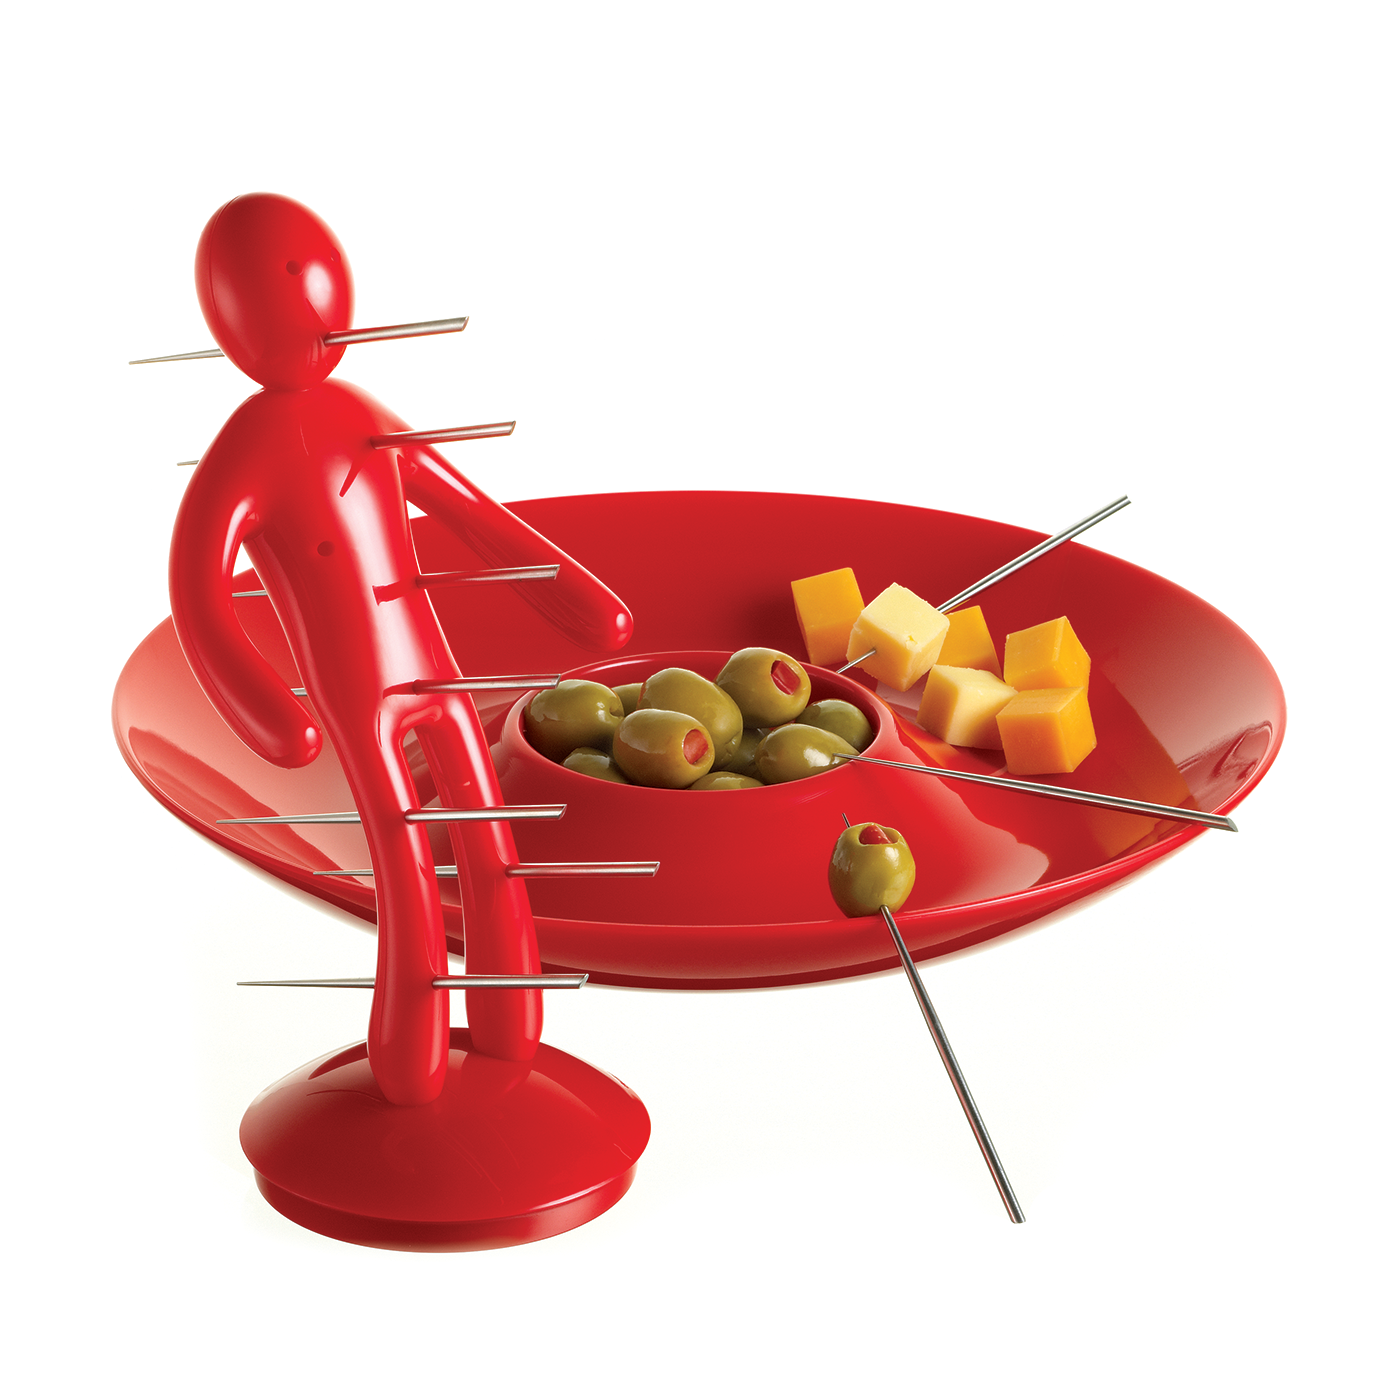 Voodoo/TheEx Aperitif Set - Red Plastic Holder and Tray